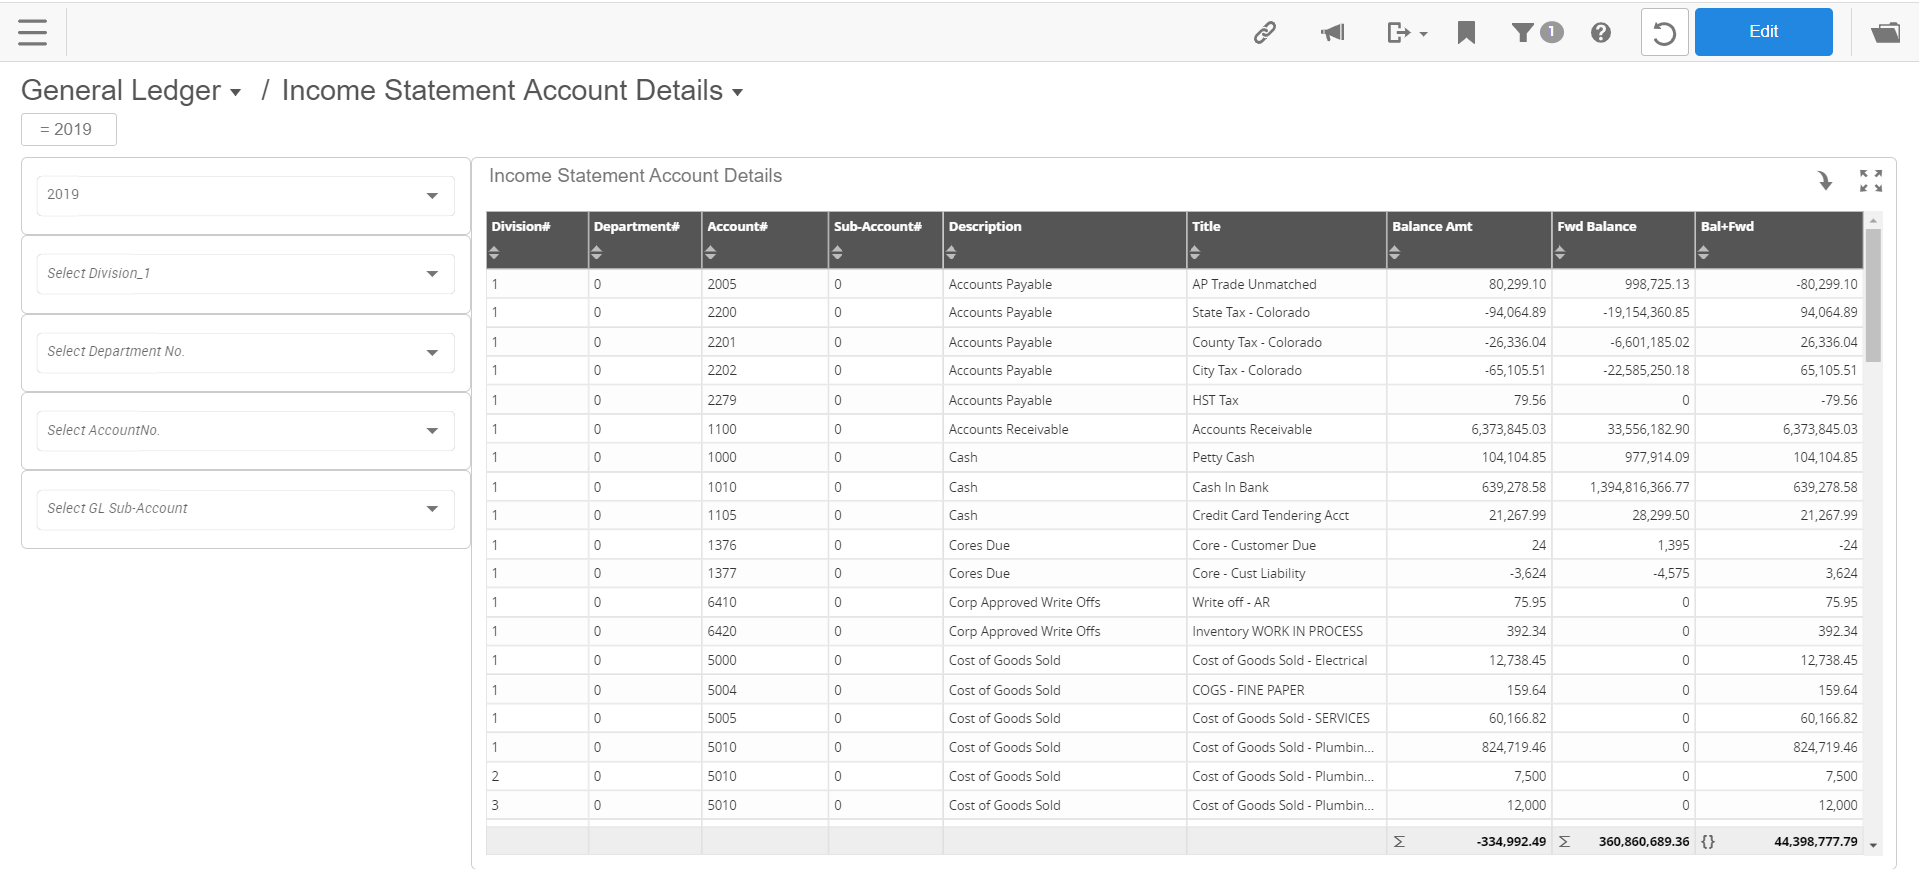 GL Income Statement Account Details dashboard